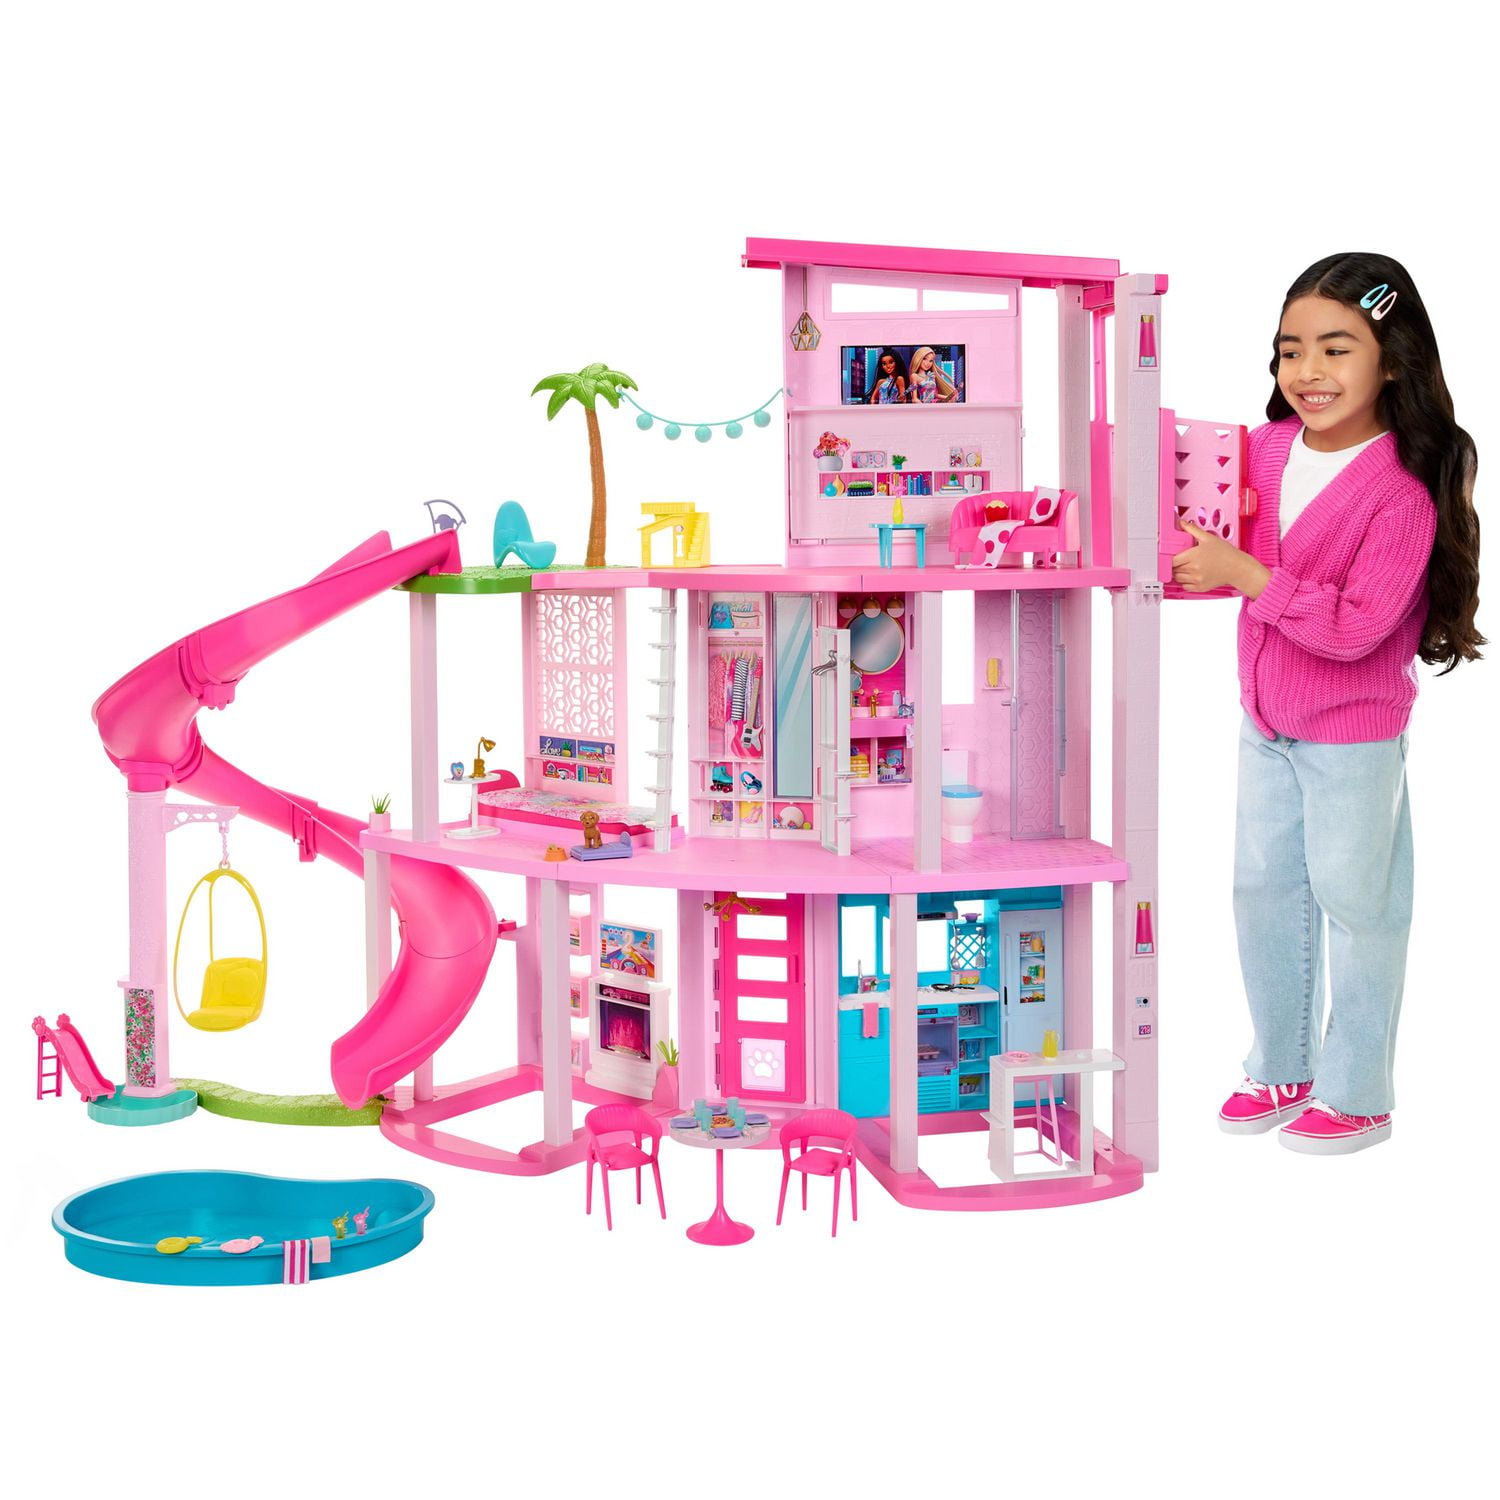 I FOUND THE AMERICAN GIRL CAMPING SET FOR $25! 